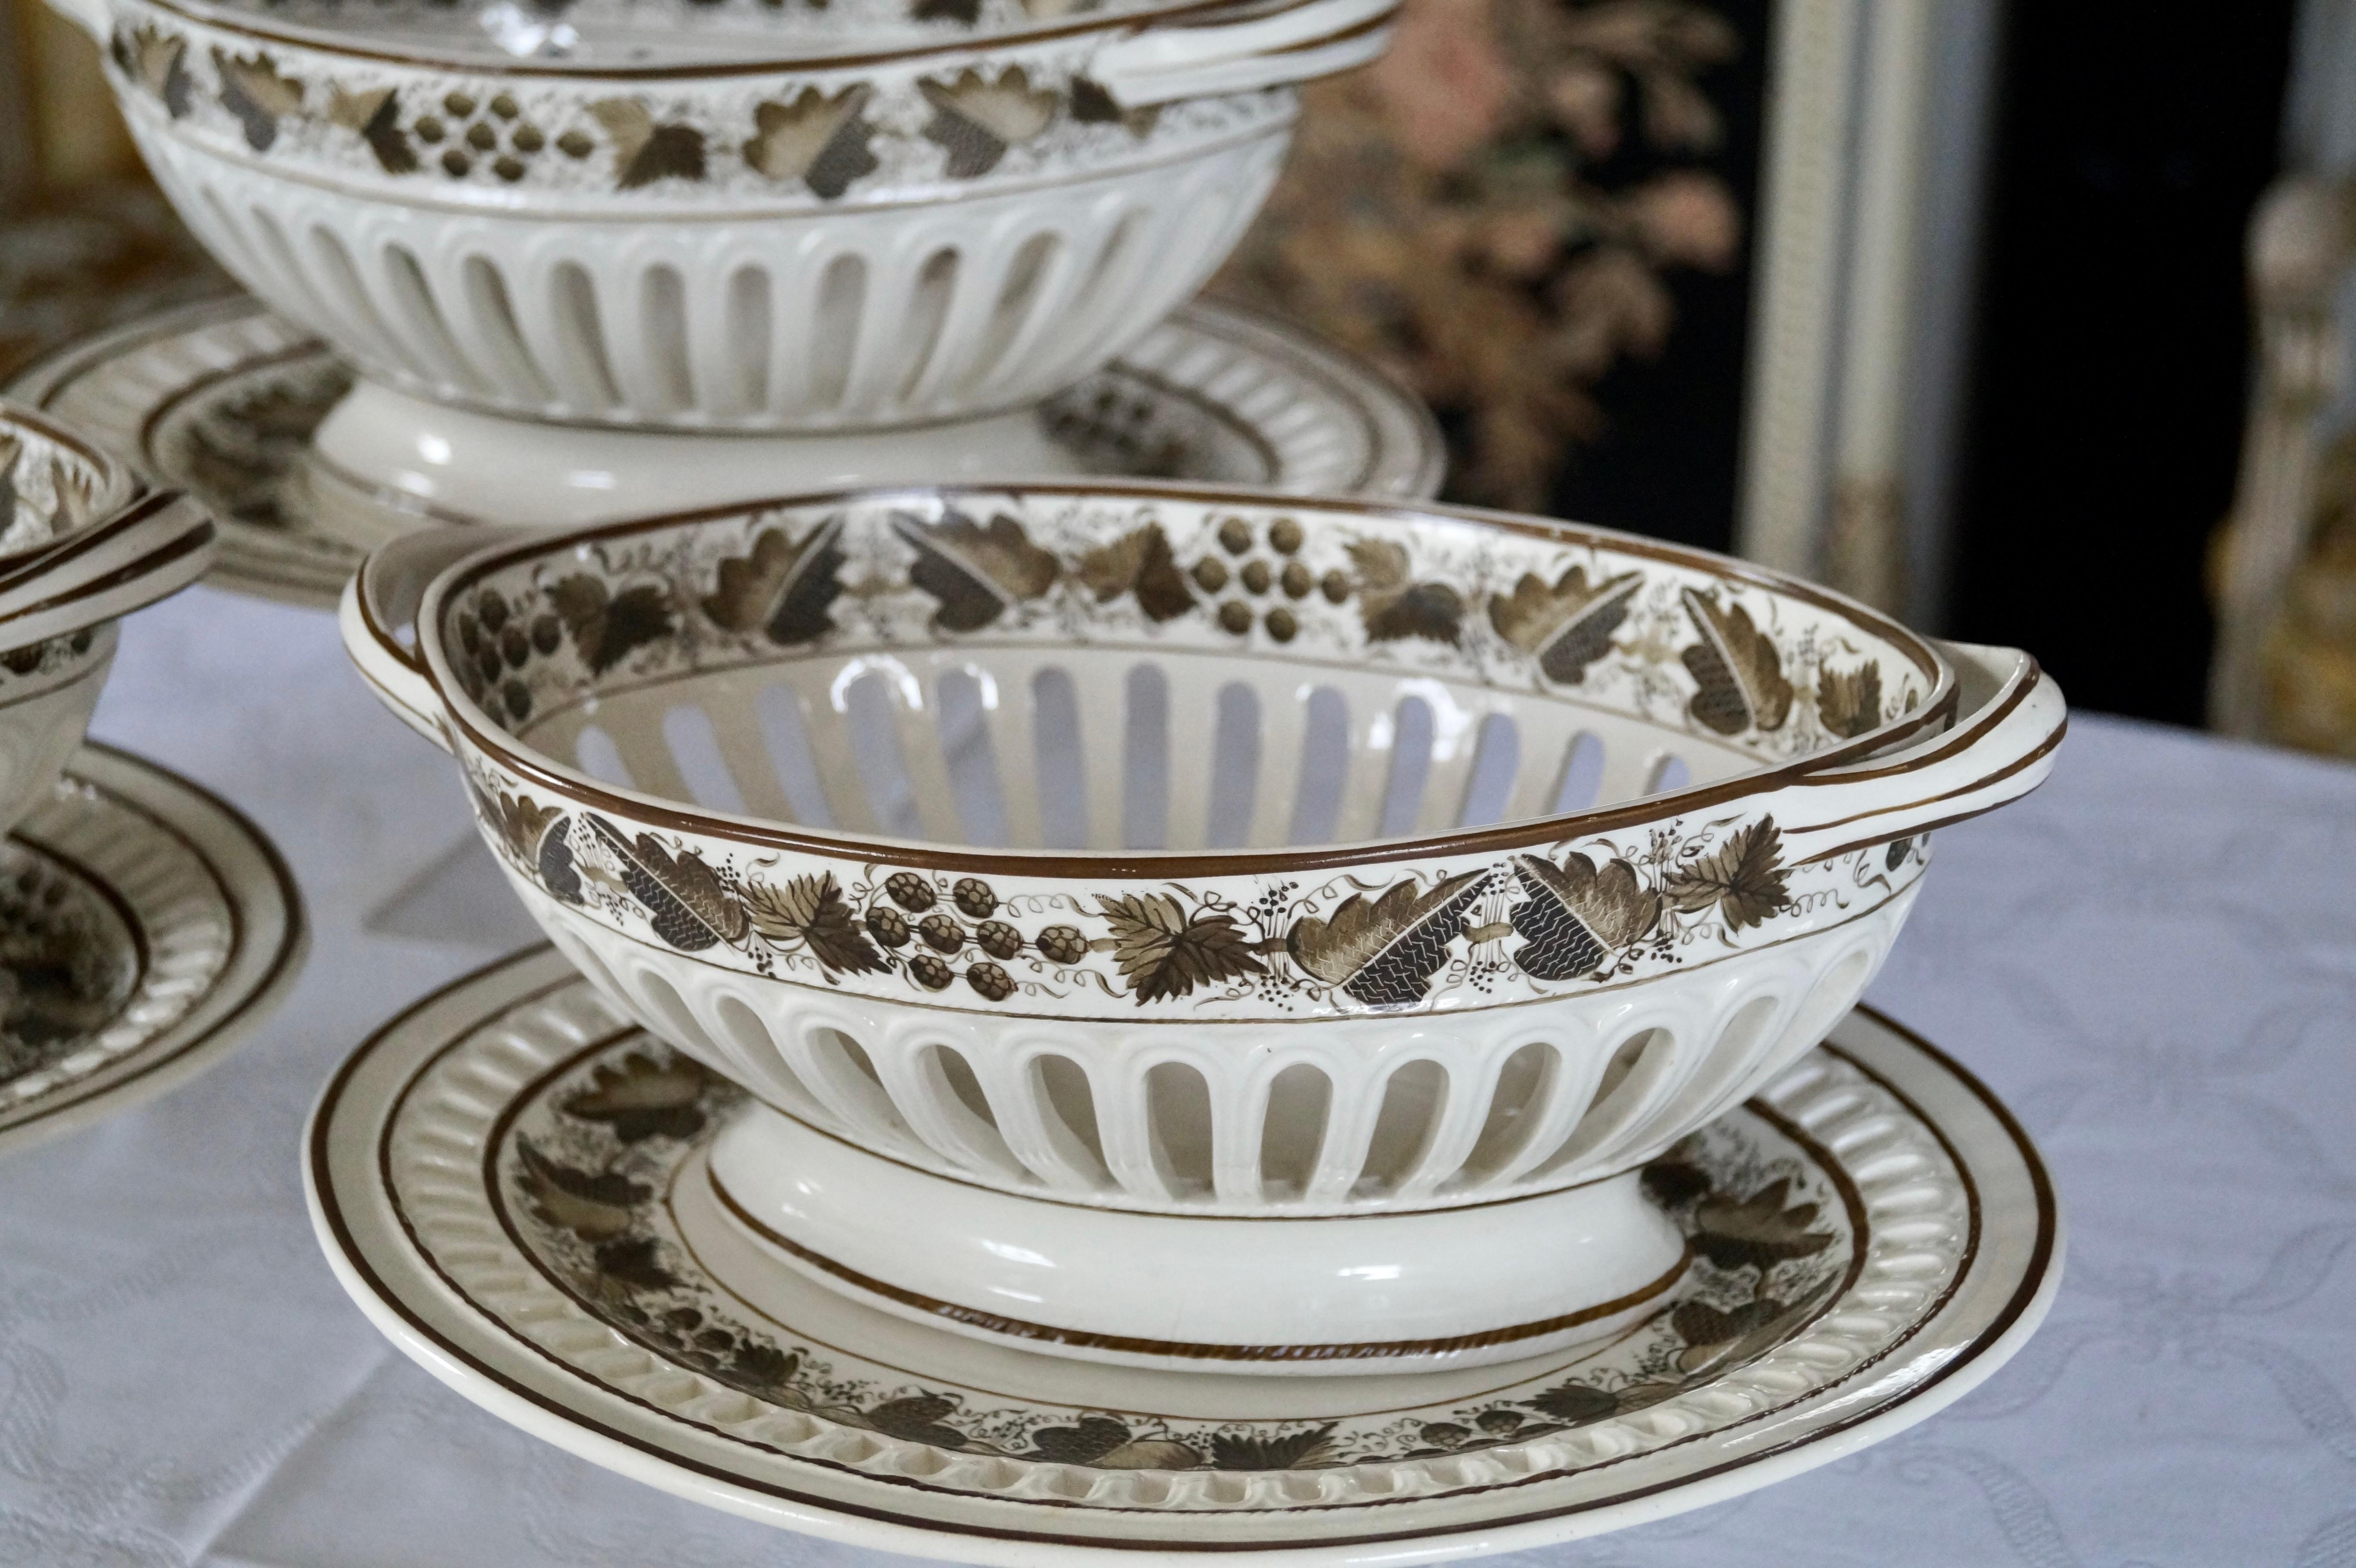 Three Beautiful Rare Antique Copeland Spode Creamware Baskets with Underplate ca 1800
 
Set of 3 antique Copeland Spode Creamware oval baskets with underplate from ca.1800  The border outside and inside are Handpainted decorated with oak leaves and